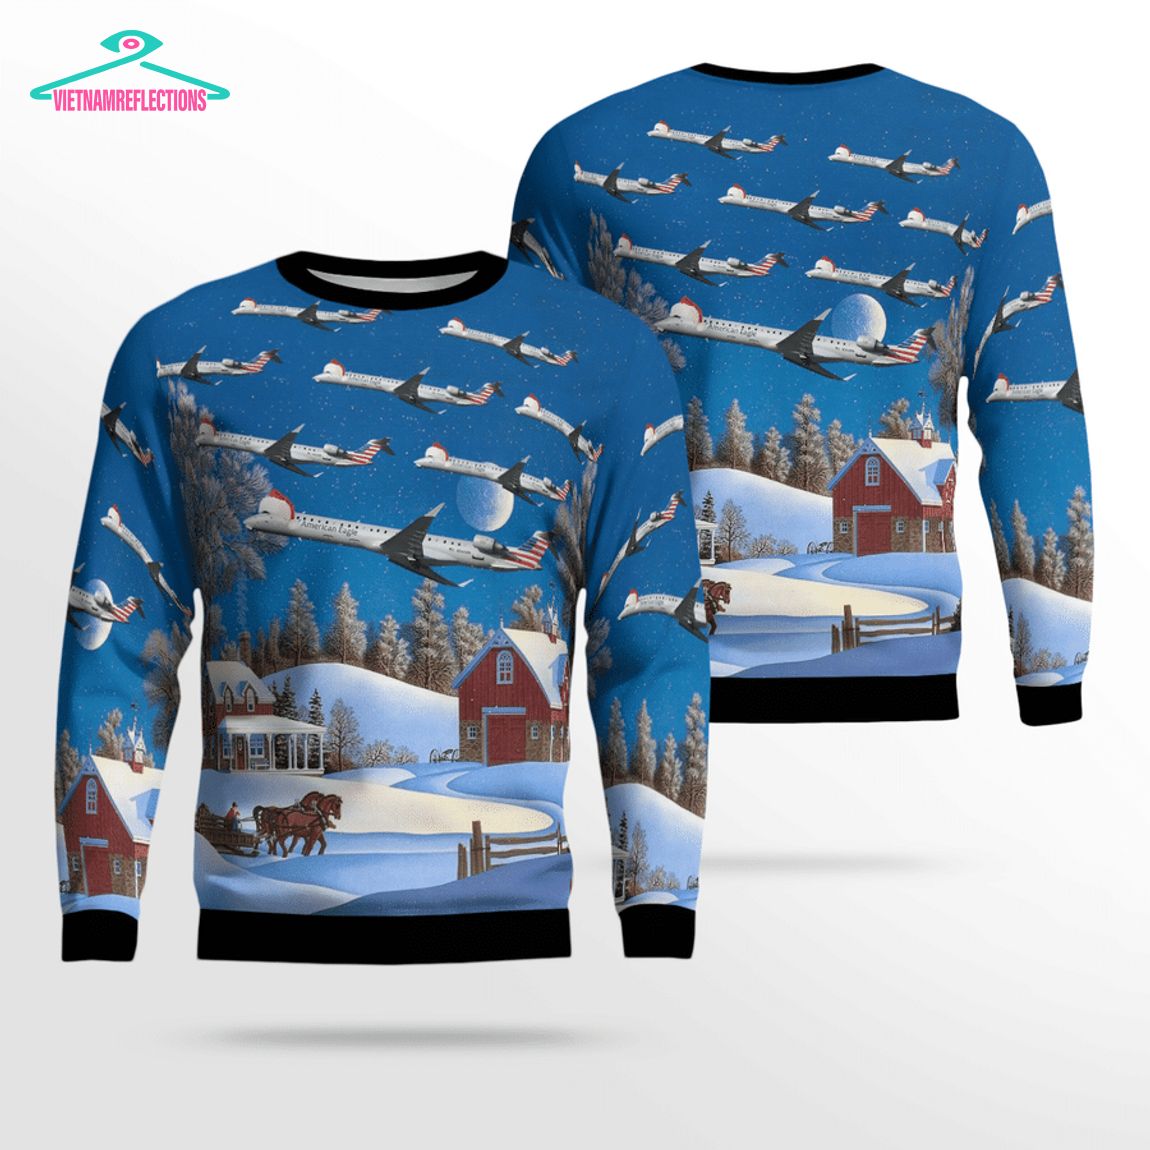 PSA Airlines Bombardier CRJ900 3D Christmas Sweater - It is too funny